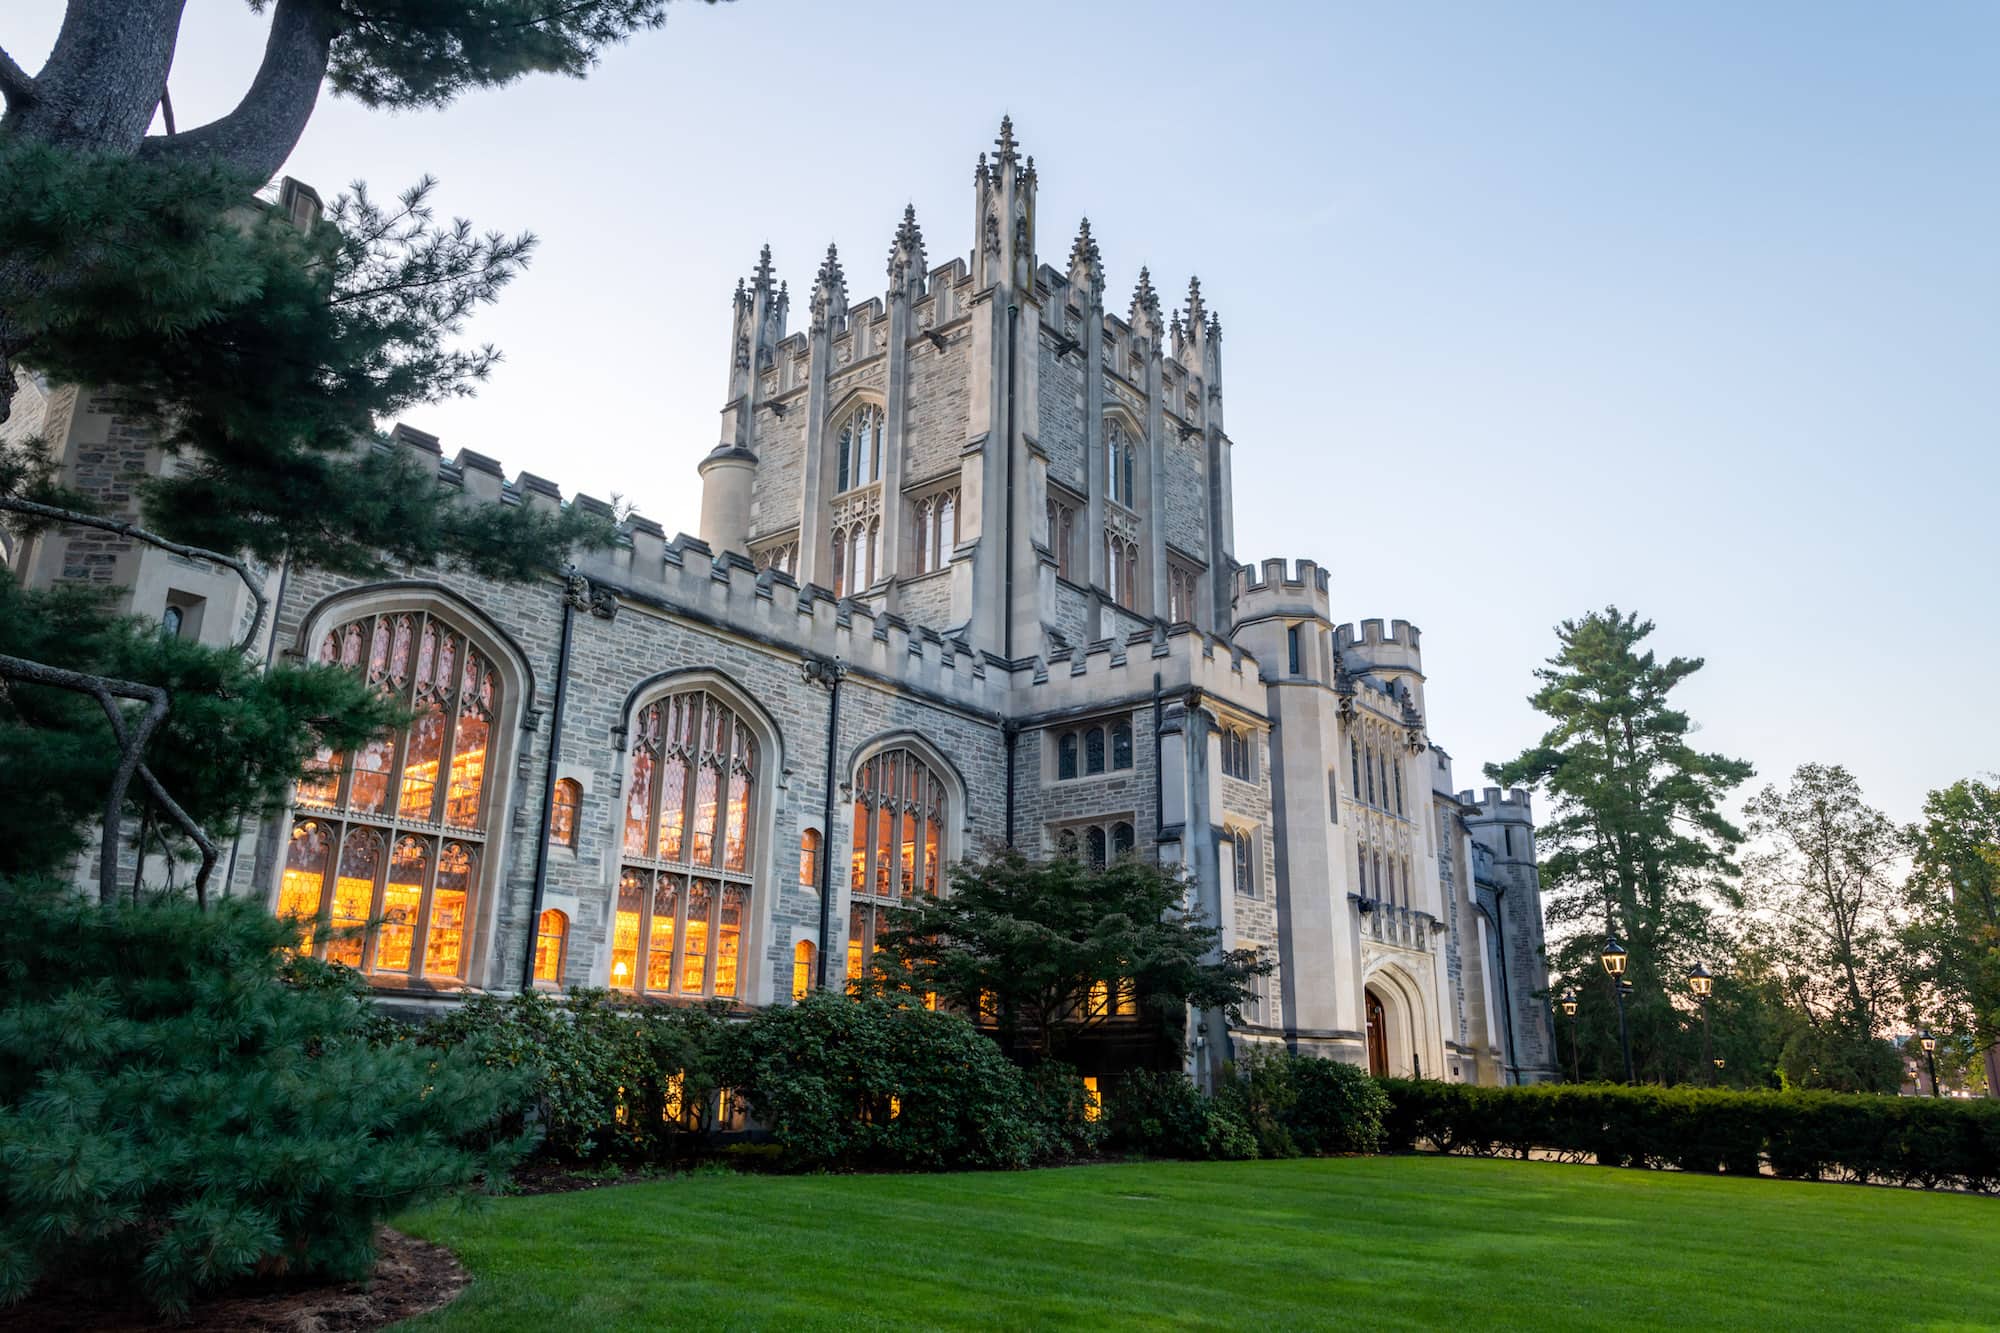 Vassar’s Thompson Memorial Library, a large, stone building with stained-glass windows and classical architecture.